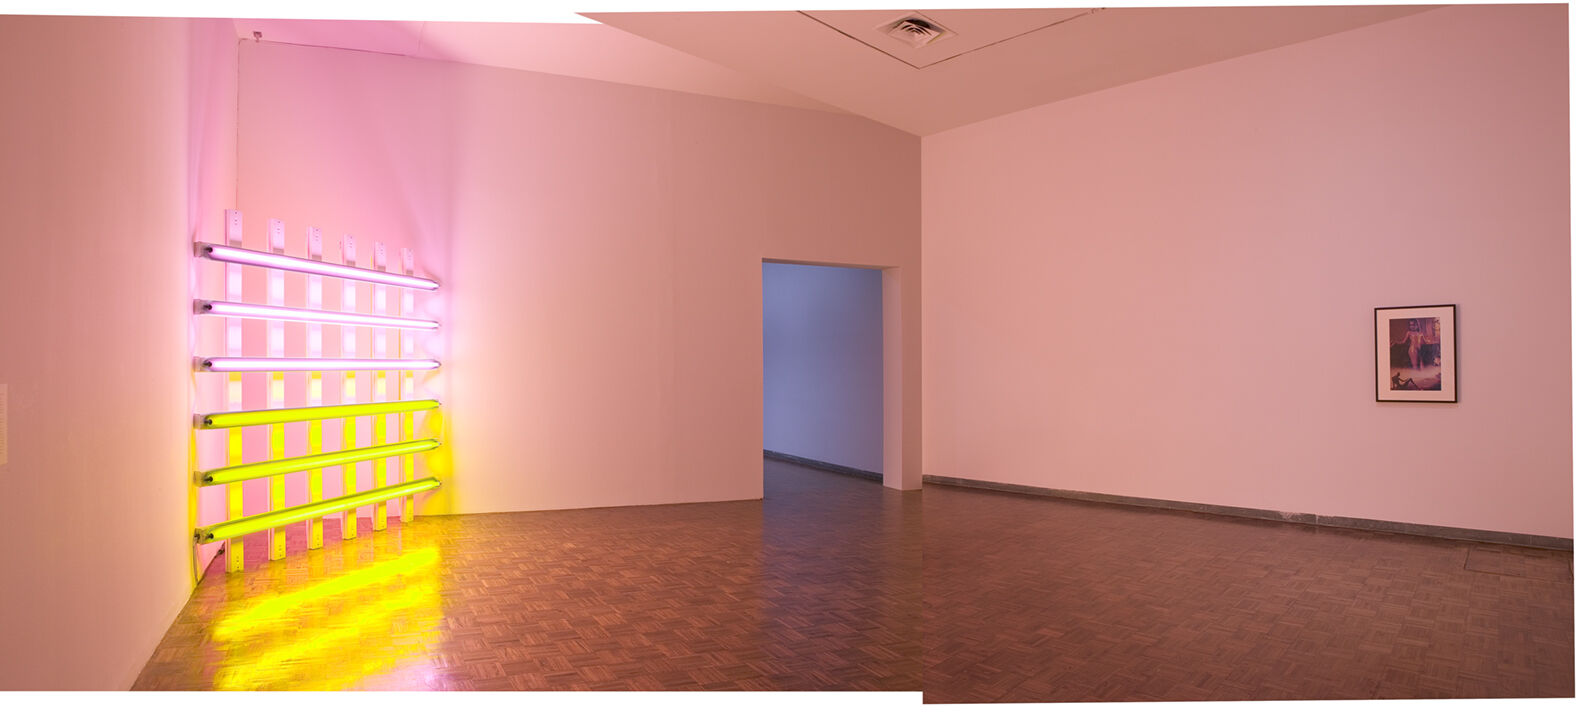 An installation with pink and yellow lighting displayed in a gallery.